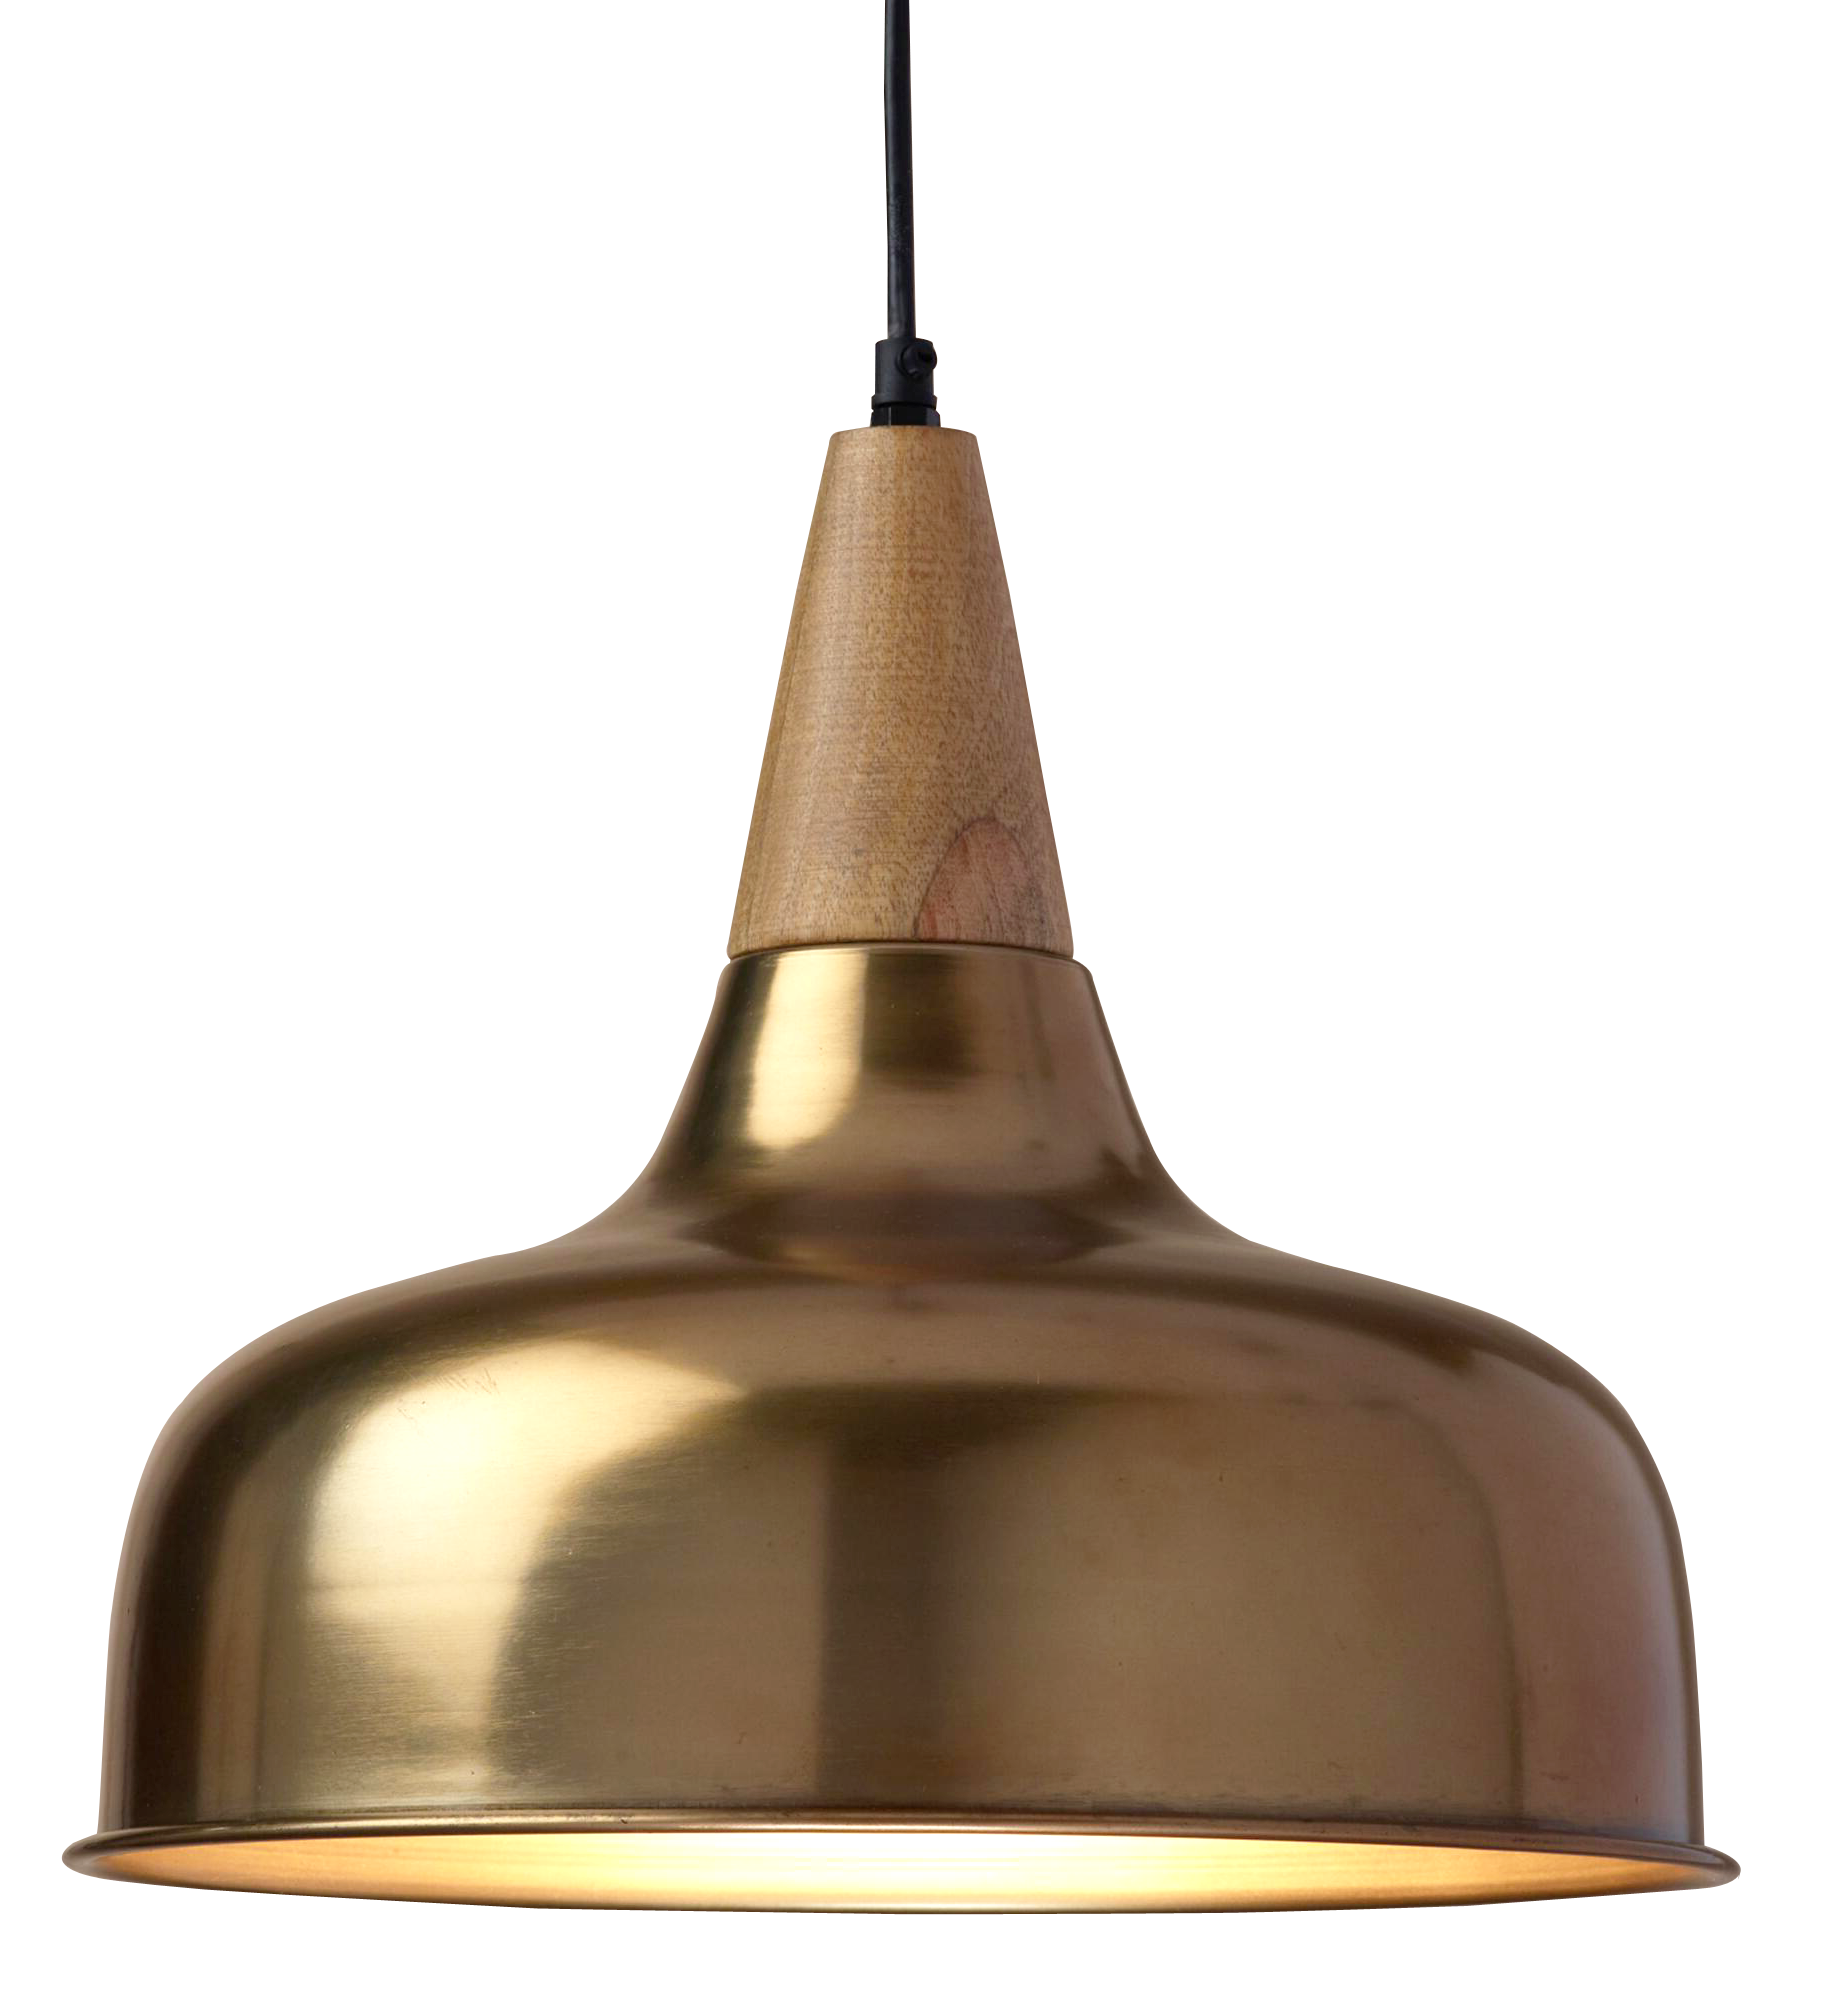 Download Hanging Lamp Png Image For Free